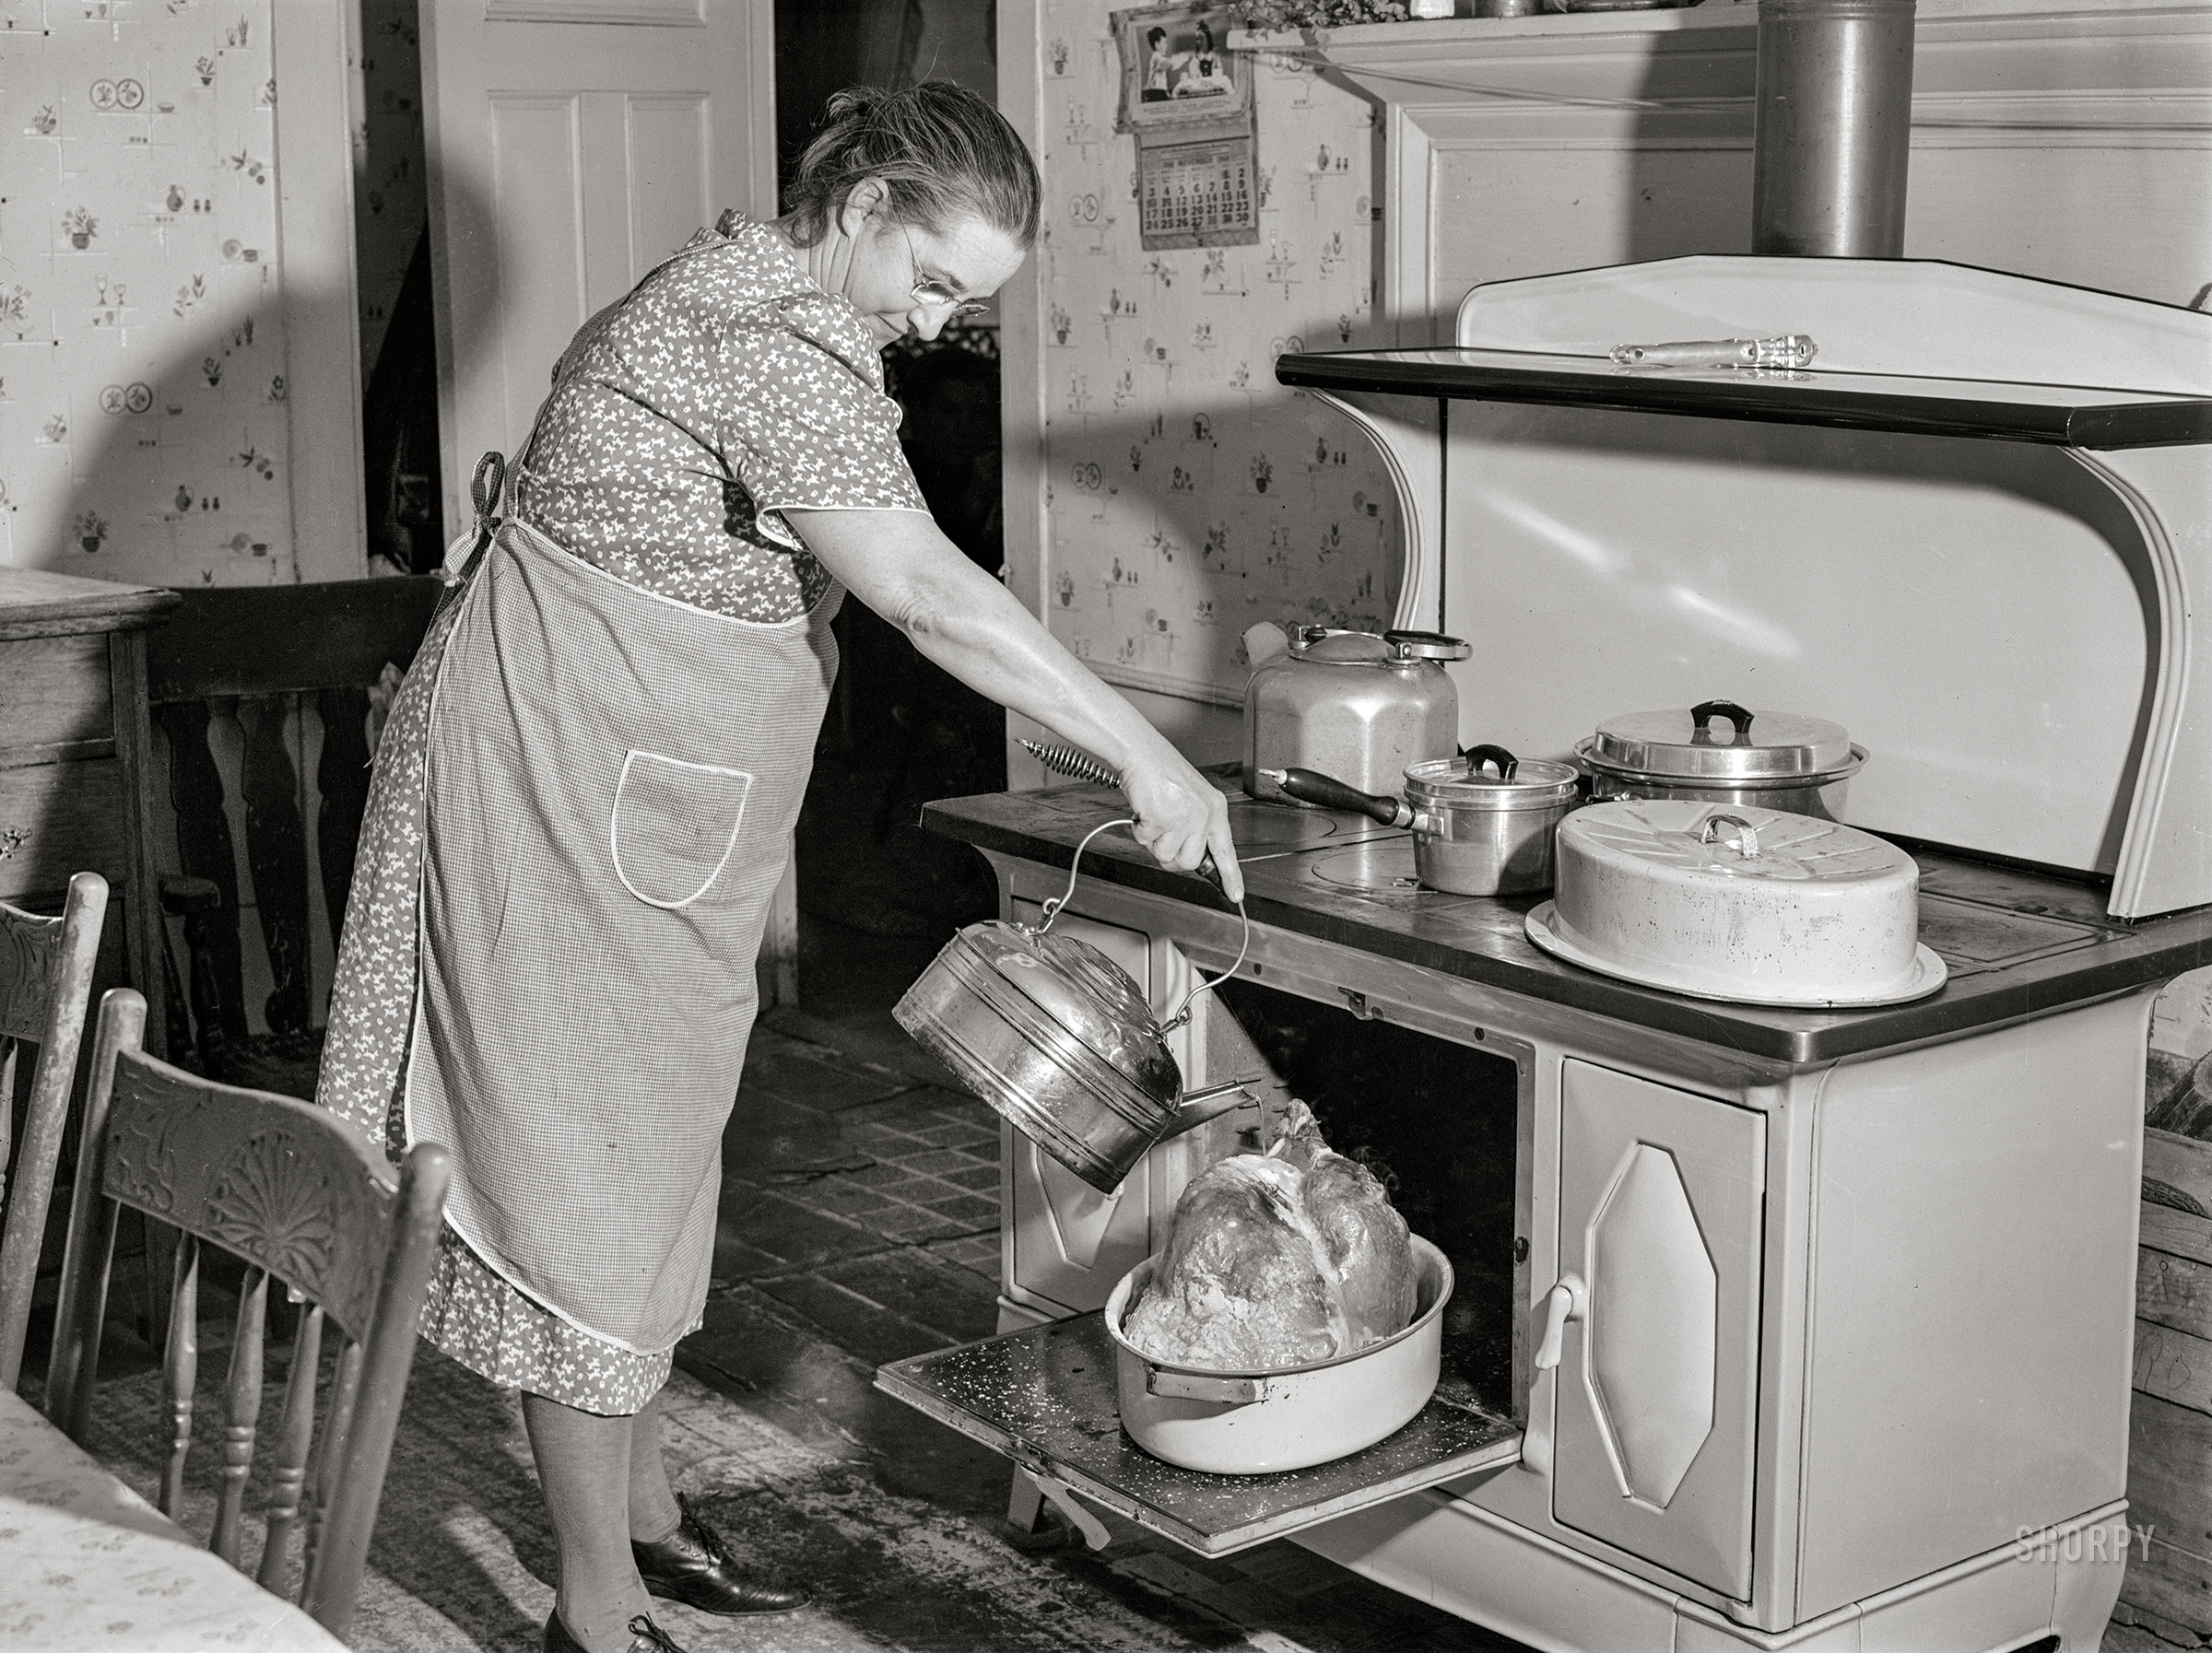 November 28, 1940. "Mrs. T.L. Crouch, of Ledyard, Connecticut, pouring some water over her twenty-pound turkey on Thanksgiving Day." Happy Thanksgiving from Shorpy! Medium format acetate negative by Jack Delano for the Farm Security Administration. View full size.